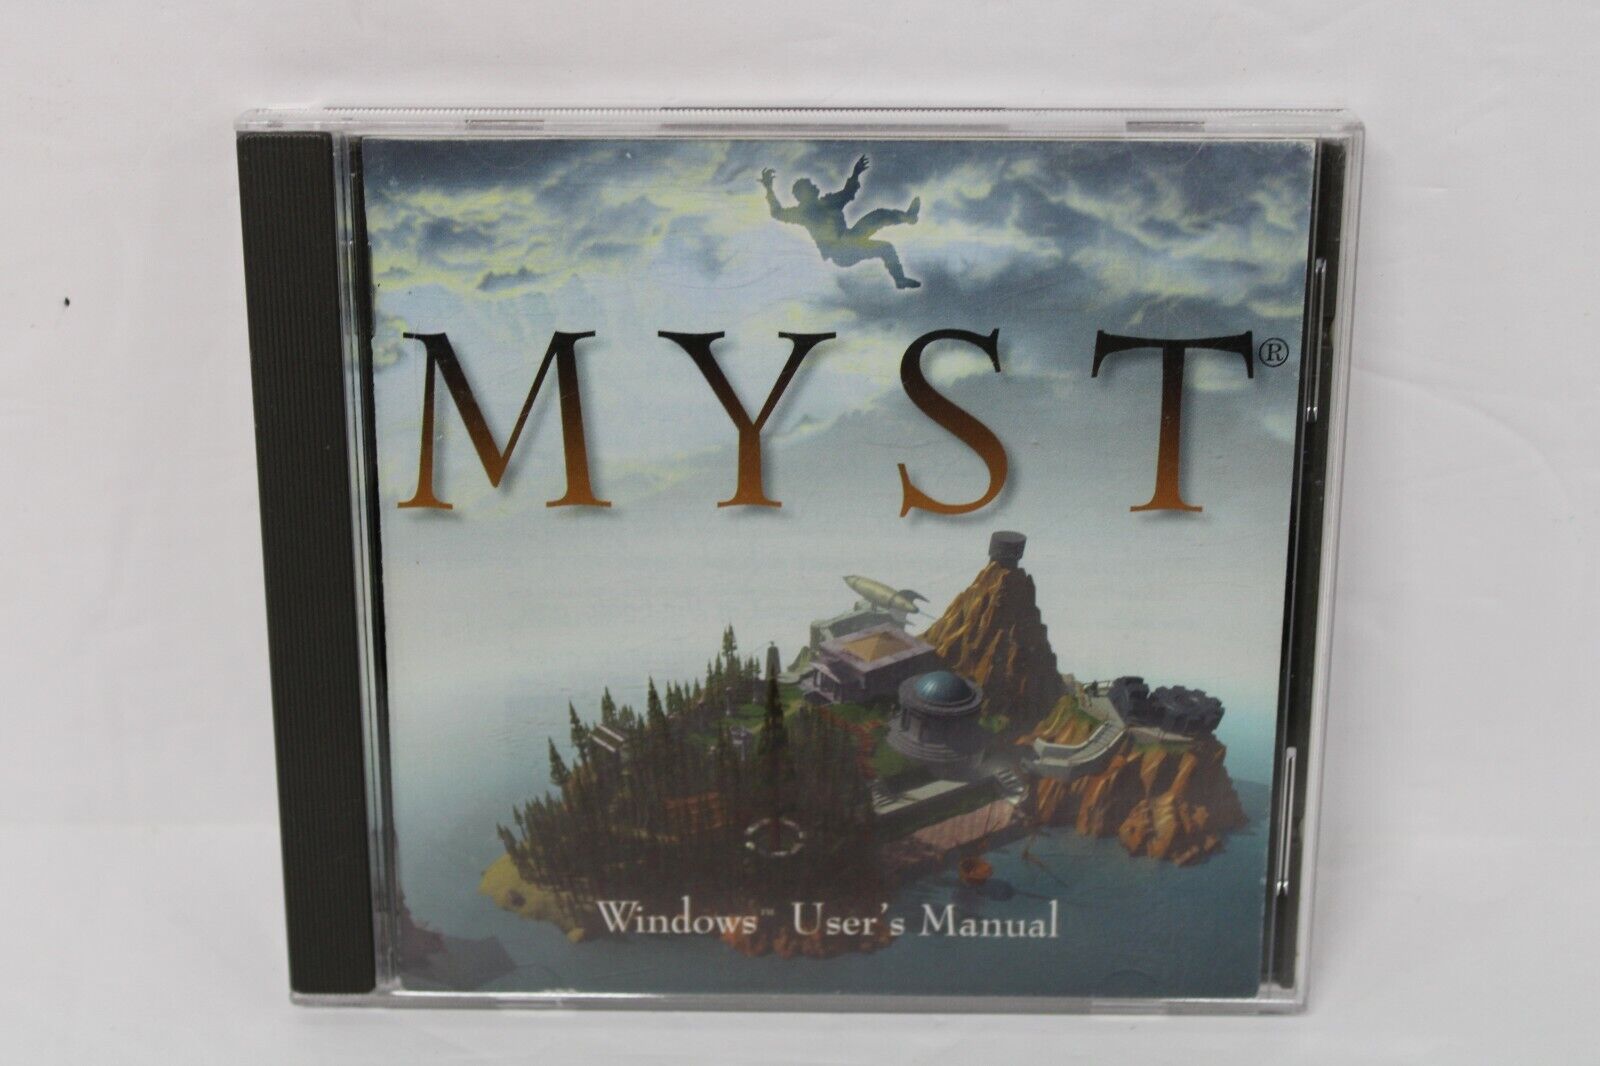 Myst PC CD-ROM game 1994 - includes booklet and case